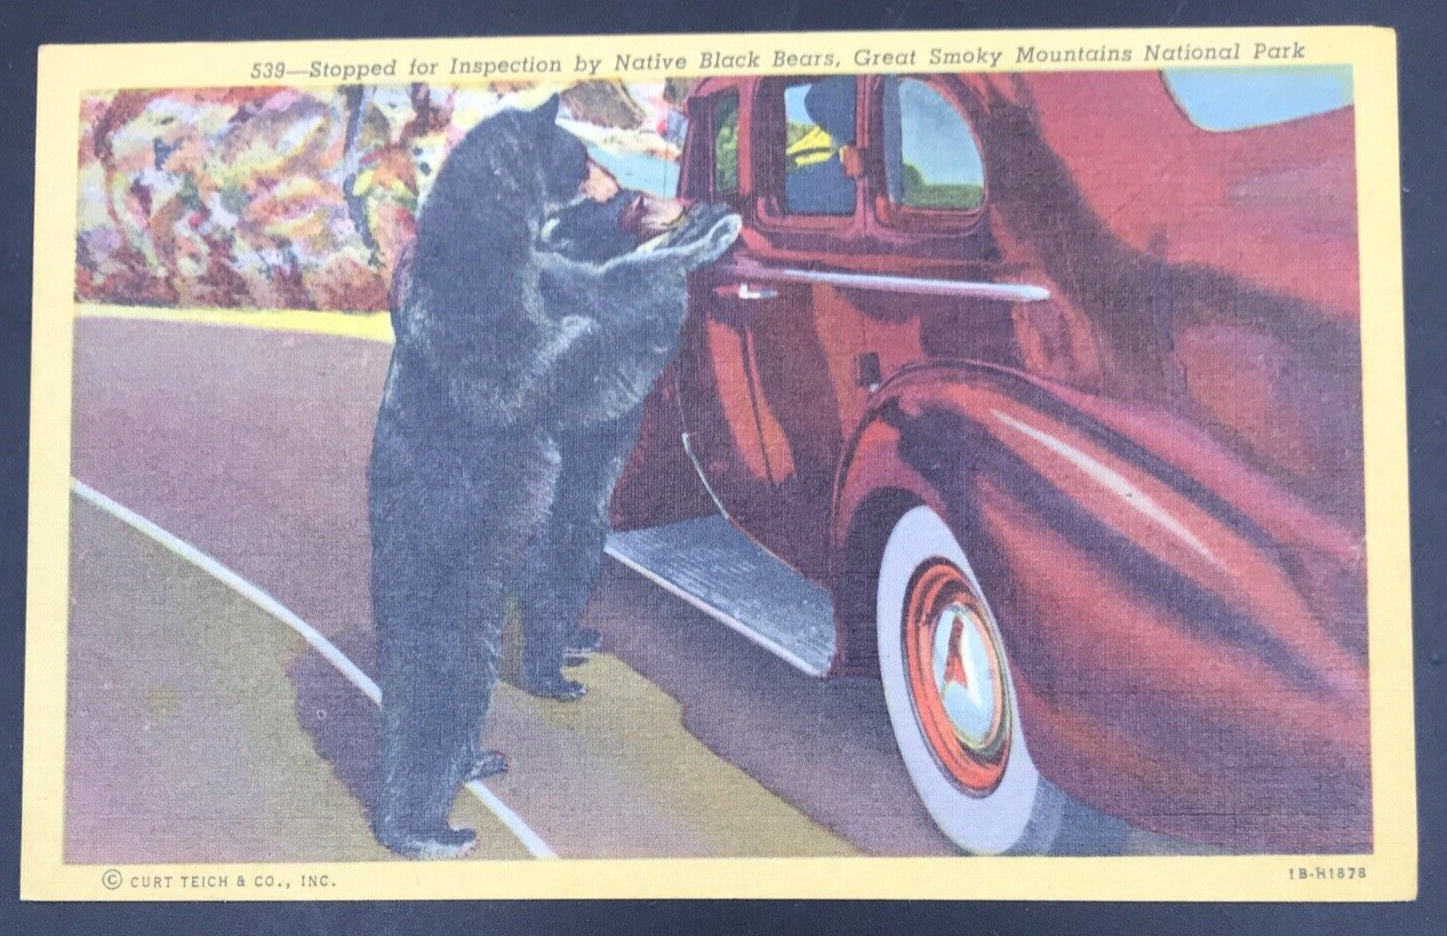 Primary image for Black Bears Inspecting Car Great Smoky Mountains National Park Linen Postcard